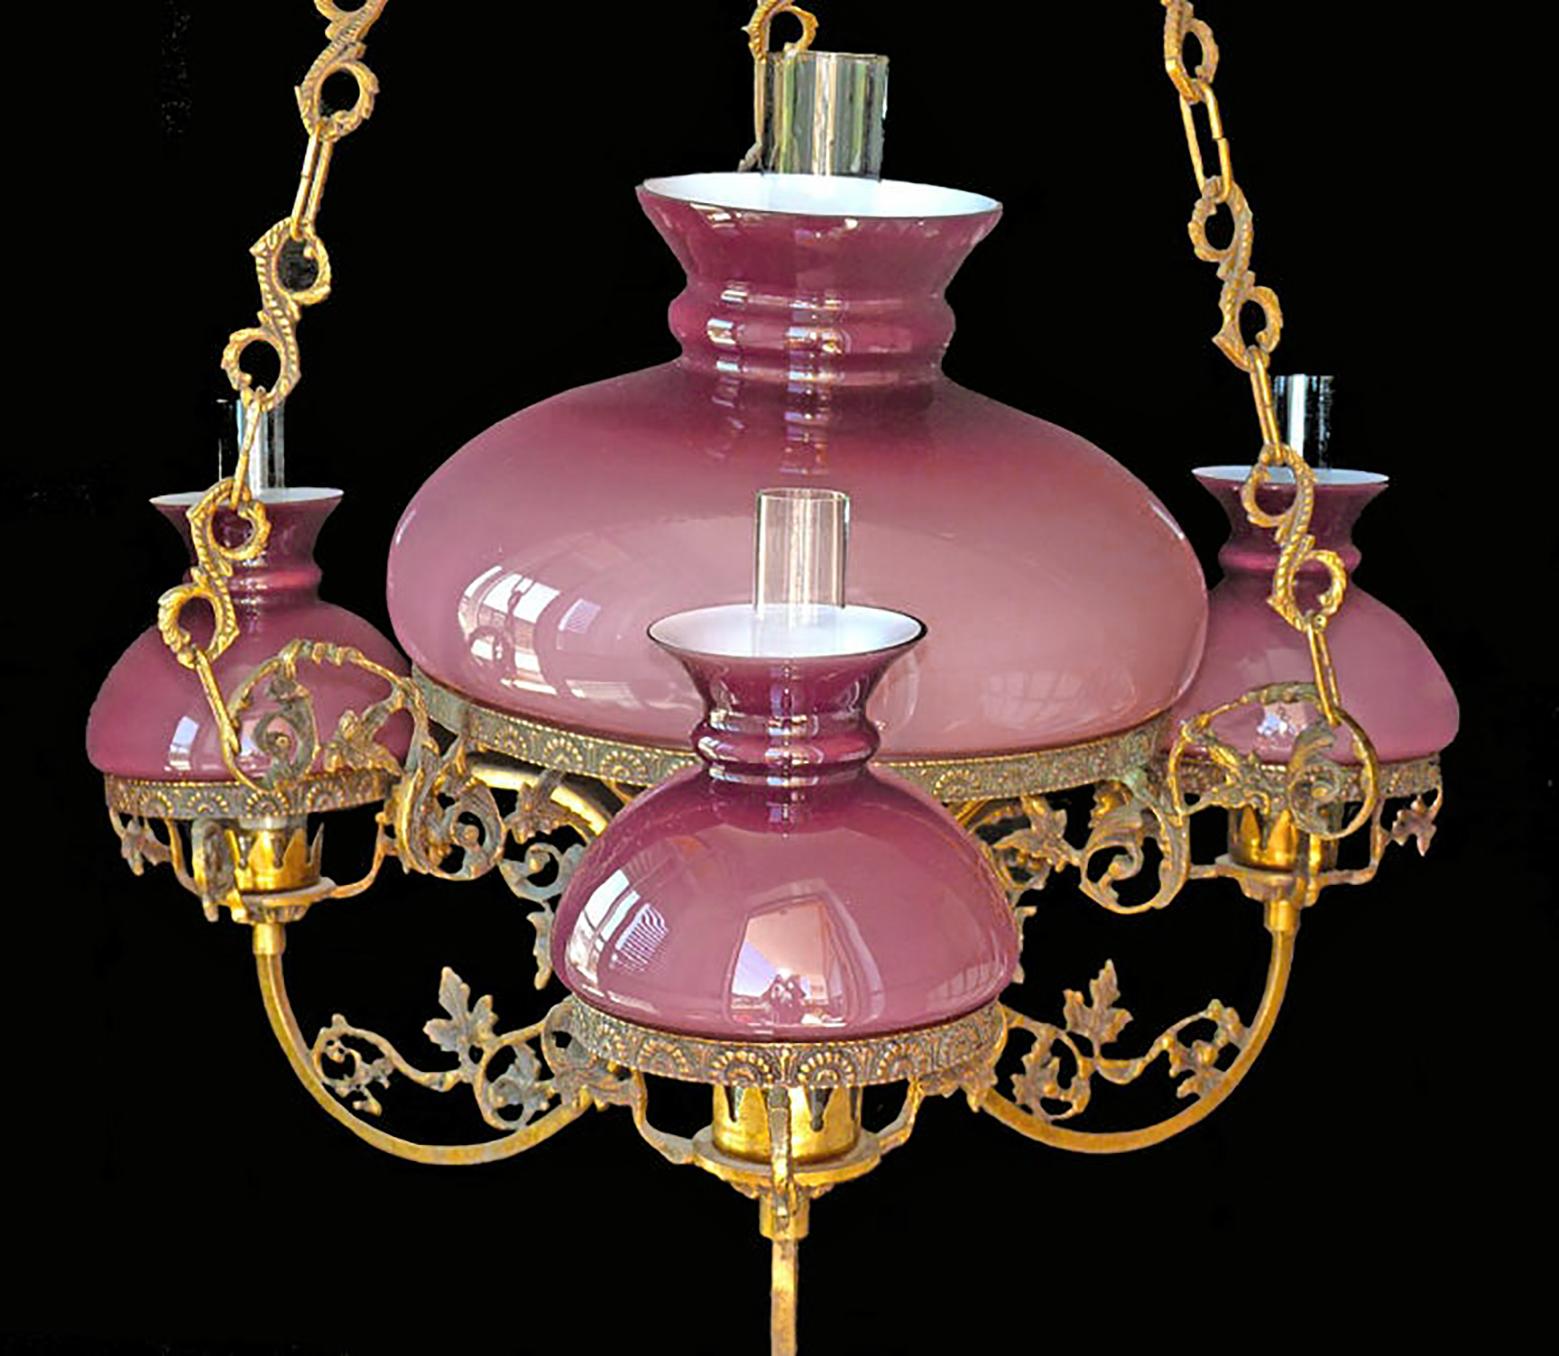 Gorgeous antique circa 1940 French Victorian four-light bulbs chandelier with opaline pink cased glass and chiselled gilt bronze/ brass.
Measures:
Diameter 30 in / 76 cm
Height 37 in / 95 cm
Diameter glass shades: 14 in (36 cm)/ 9 in (23 cm)/